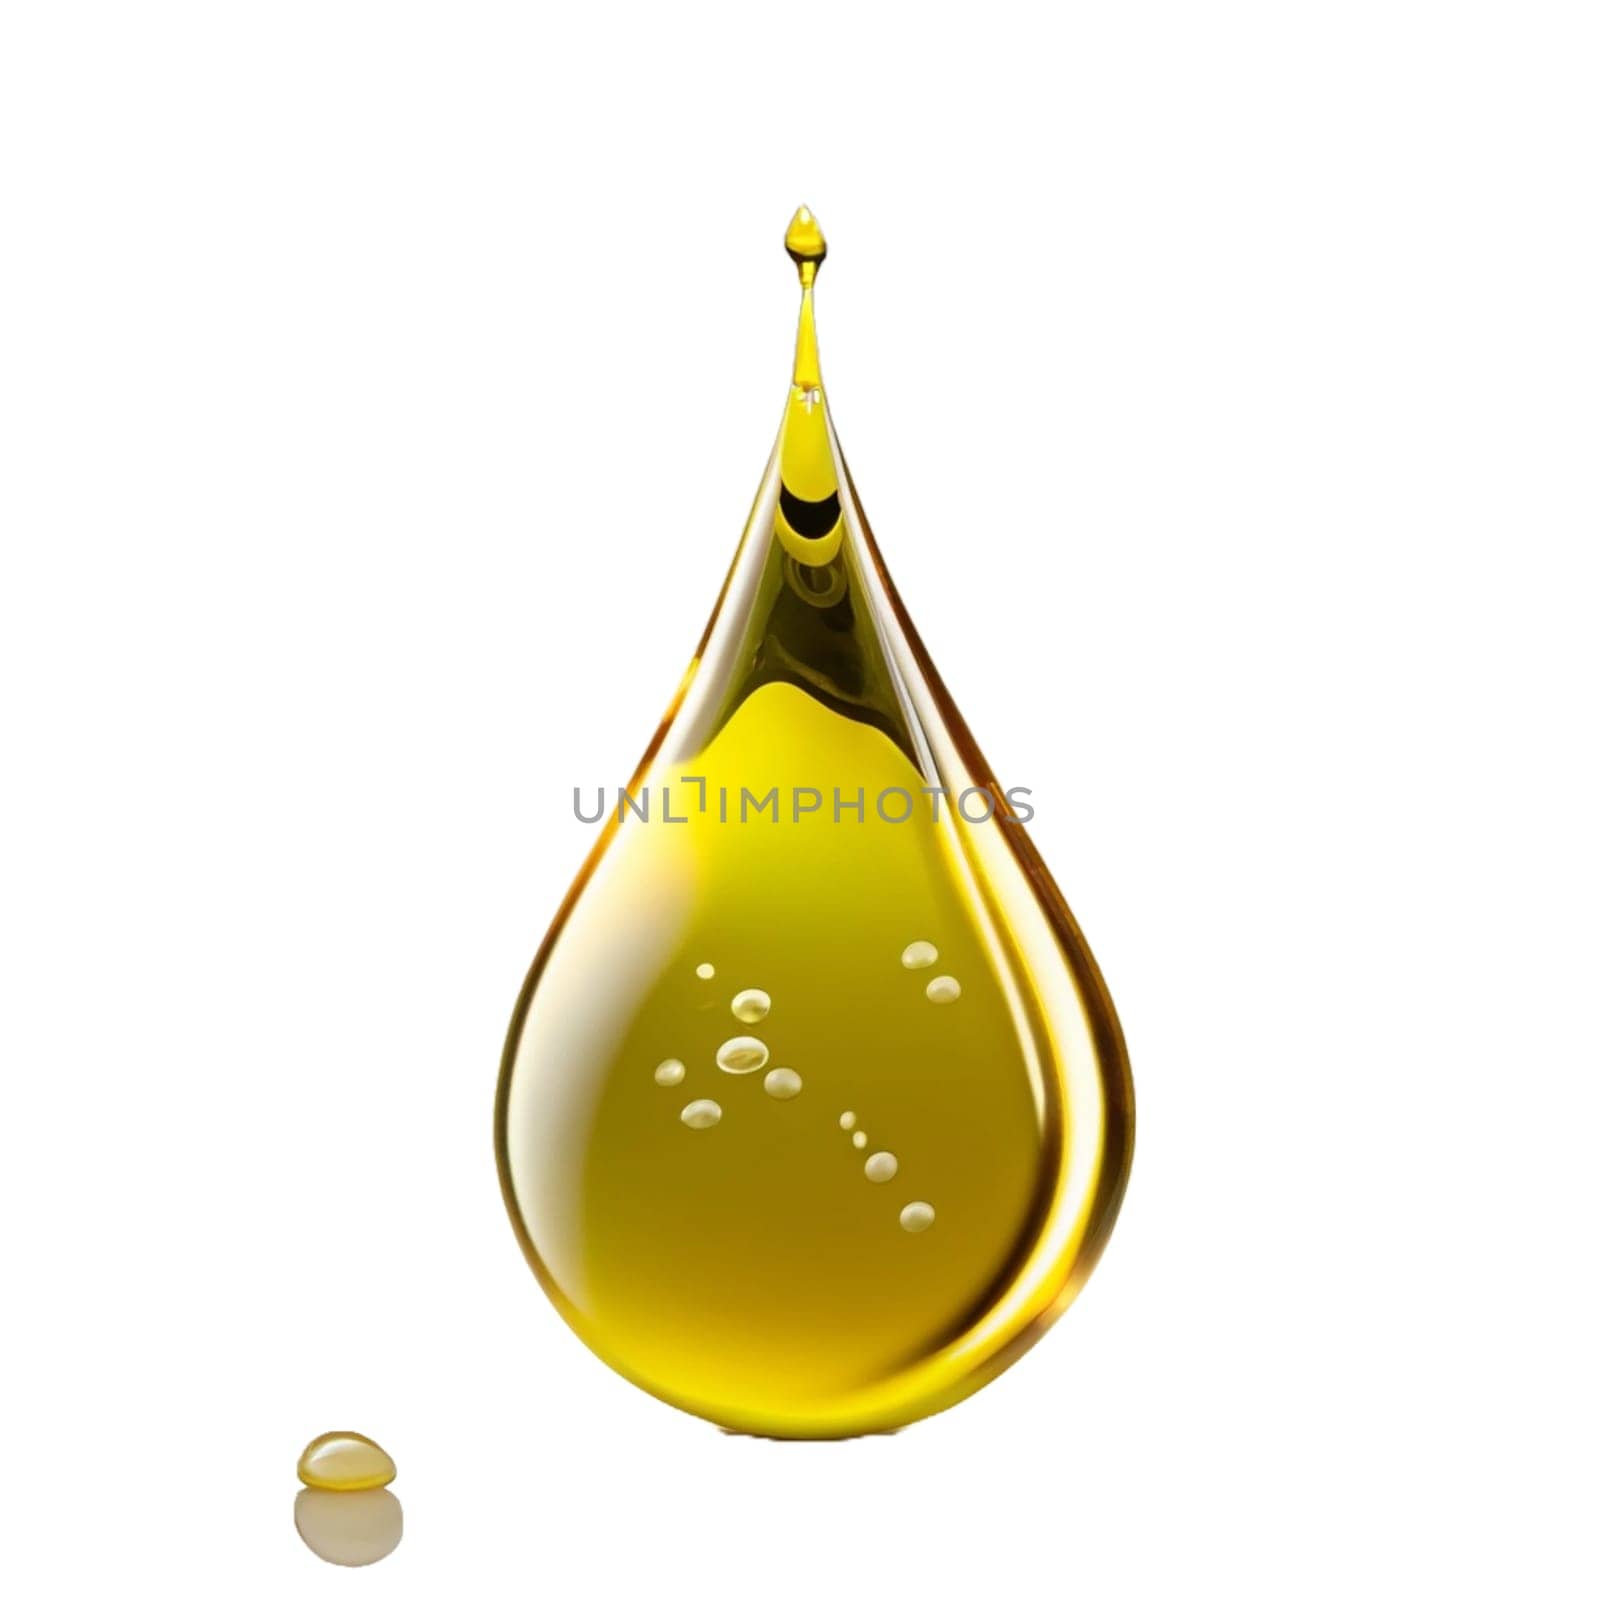 Oil drop isolated on braun background as industrial or petroleum concept. png image. High quality image